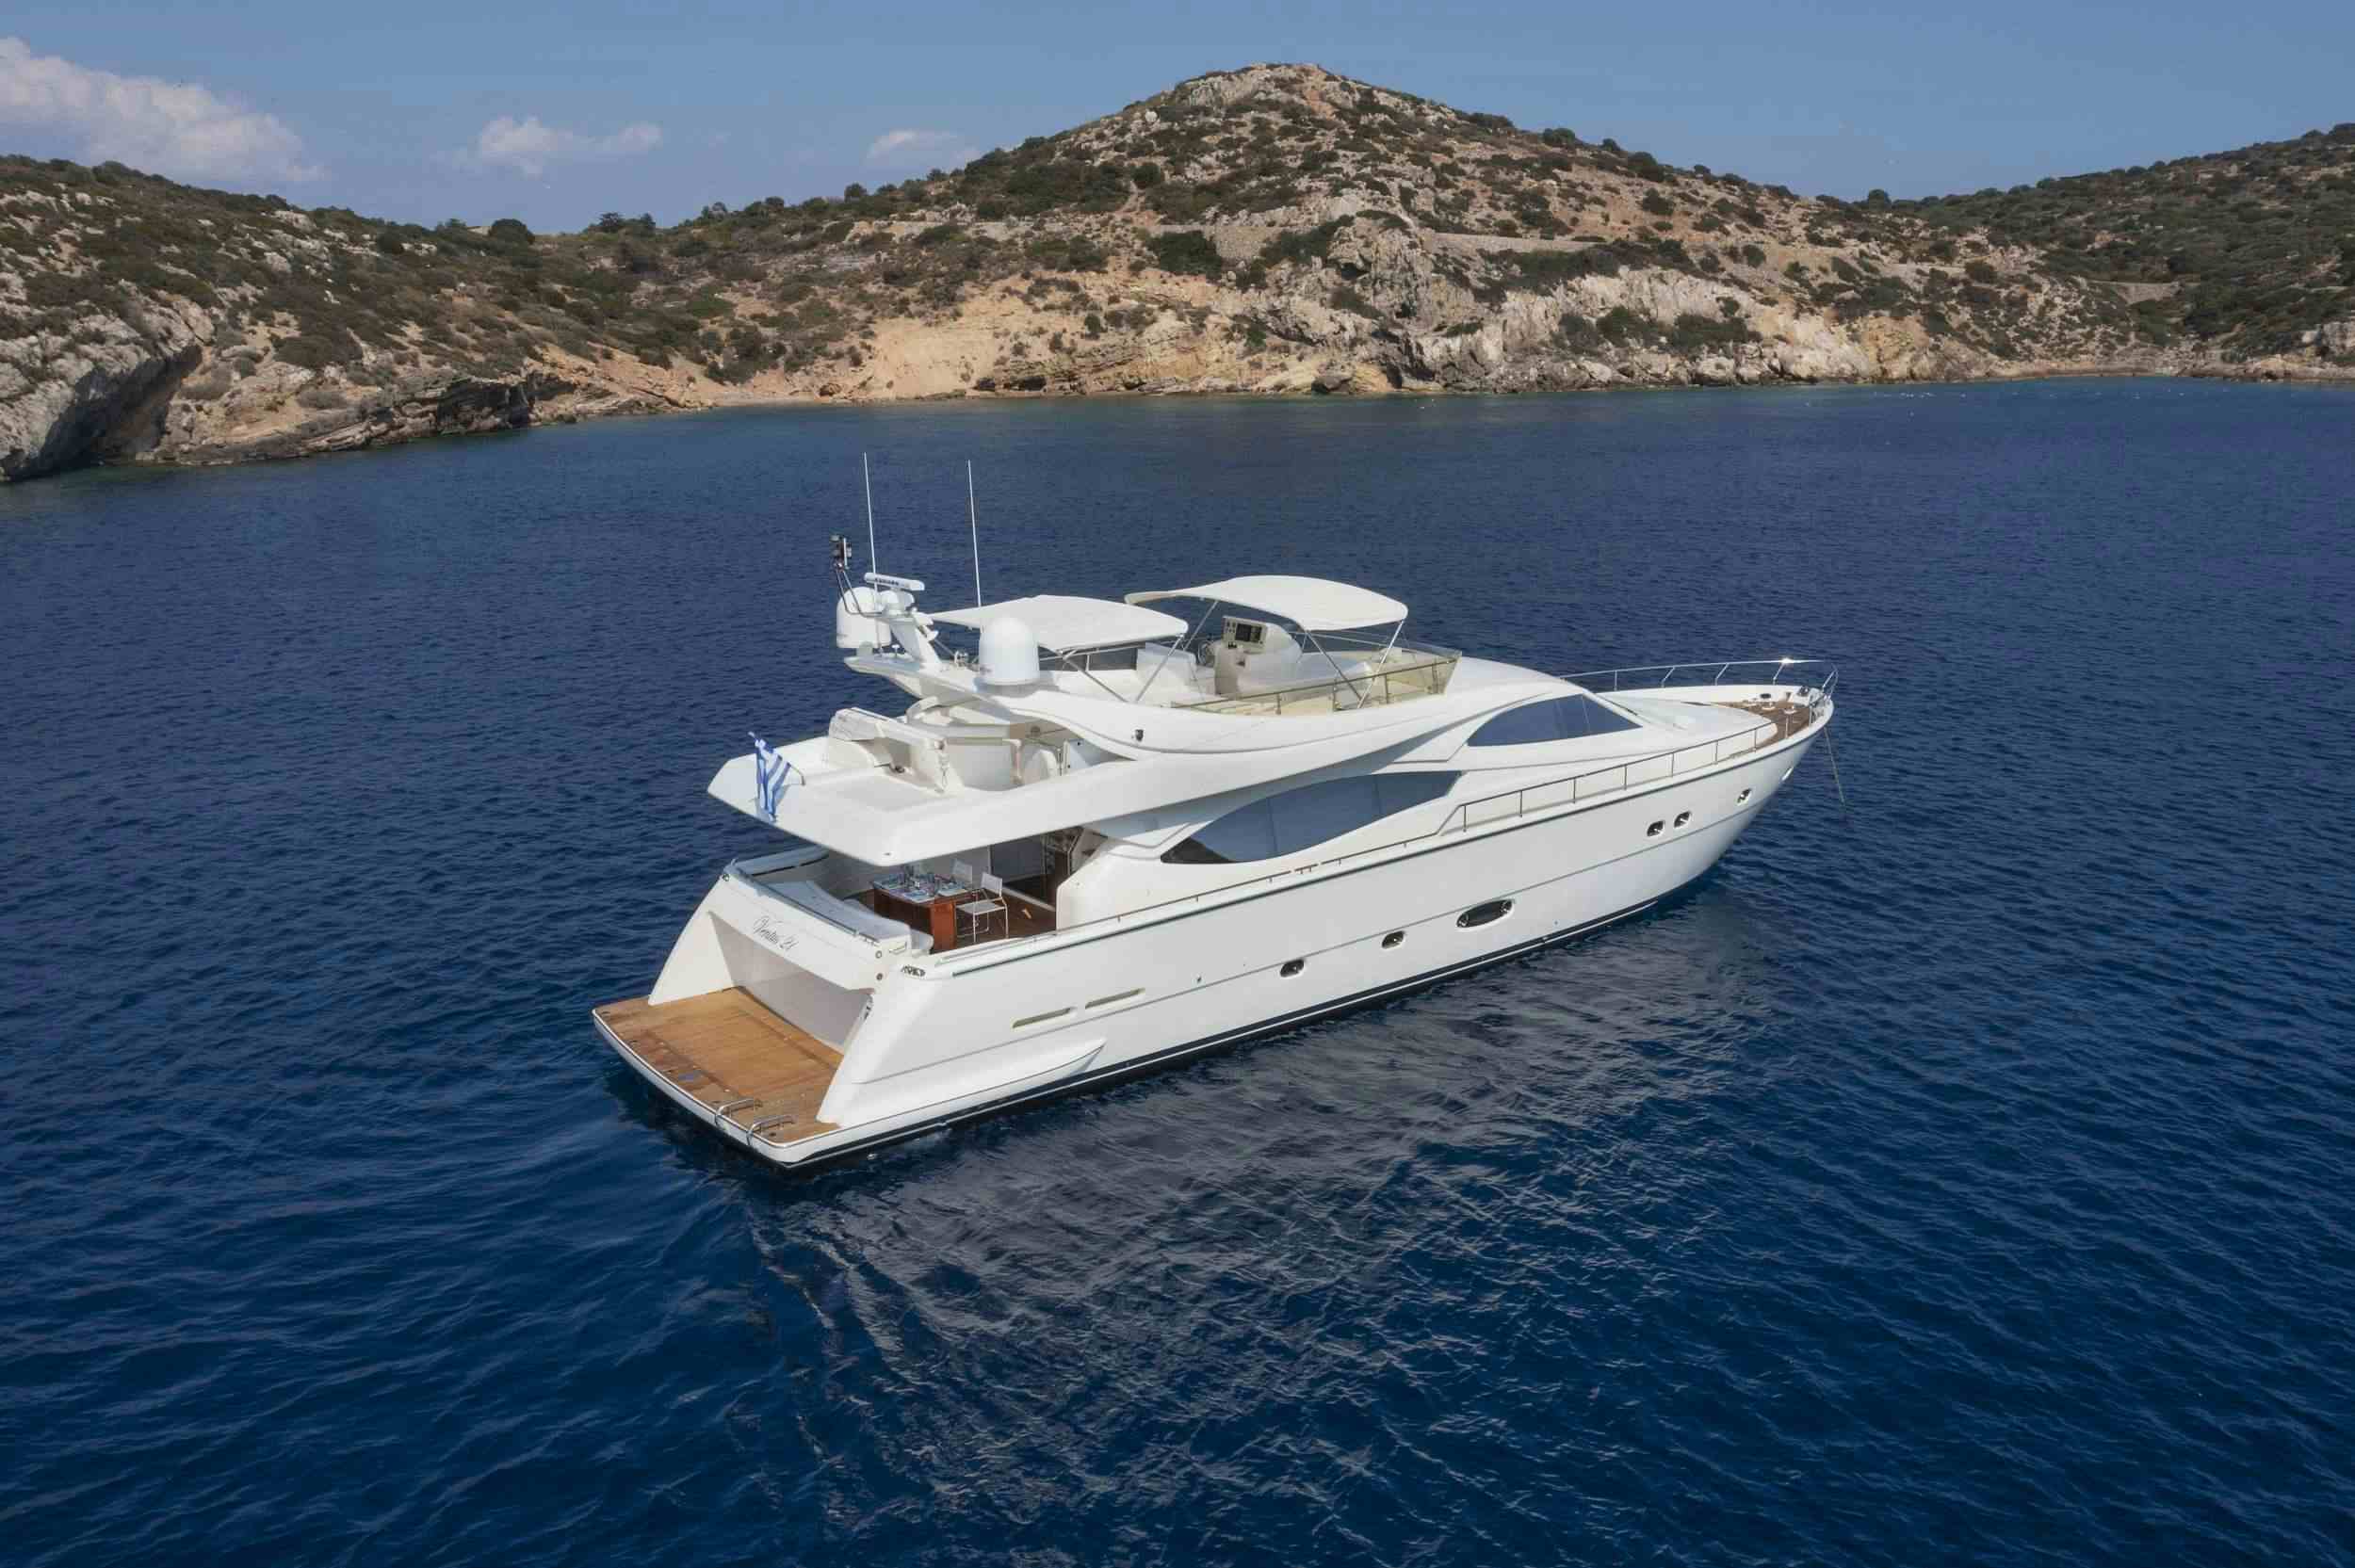 Ventus 21 - Yacht Charter Athens & Boat hire in Greece 1